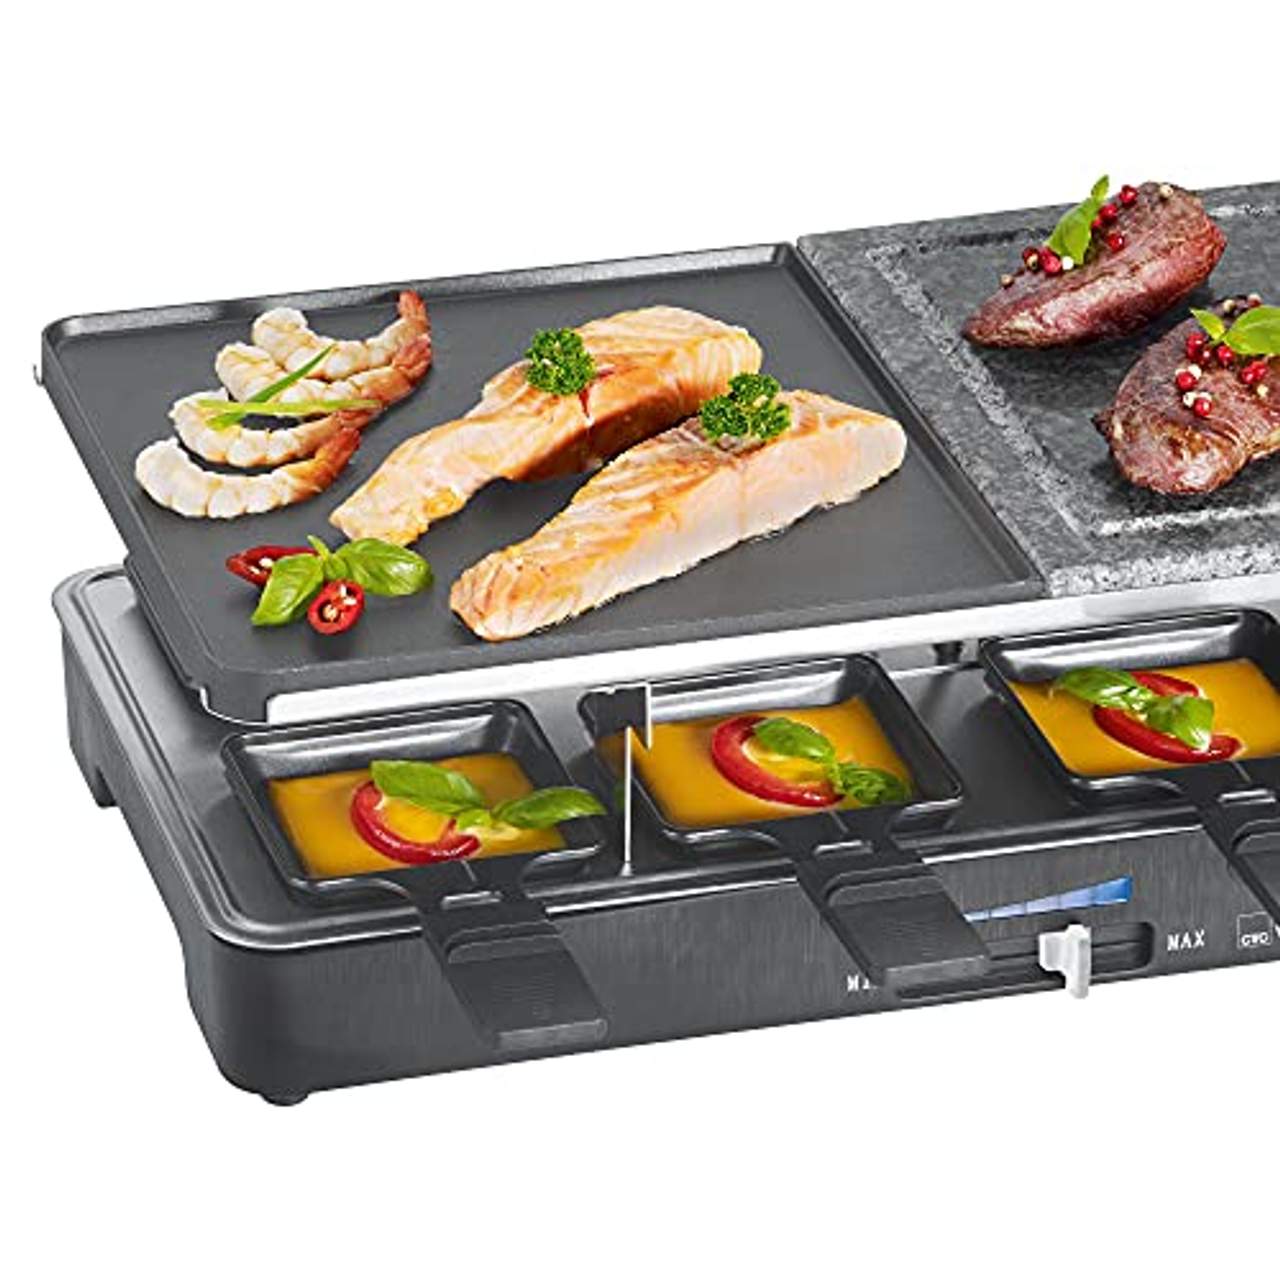 Clatronic RG 3518 Raclette-Grill